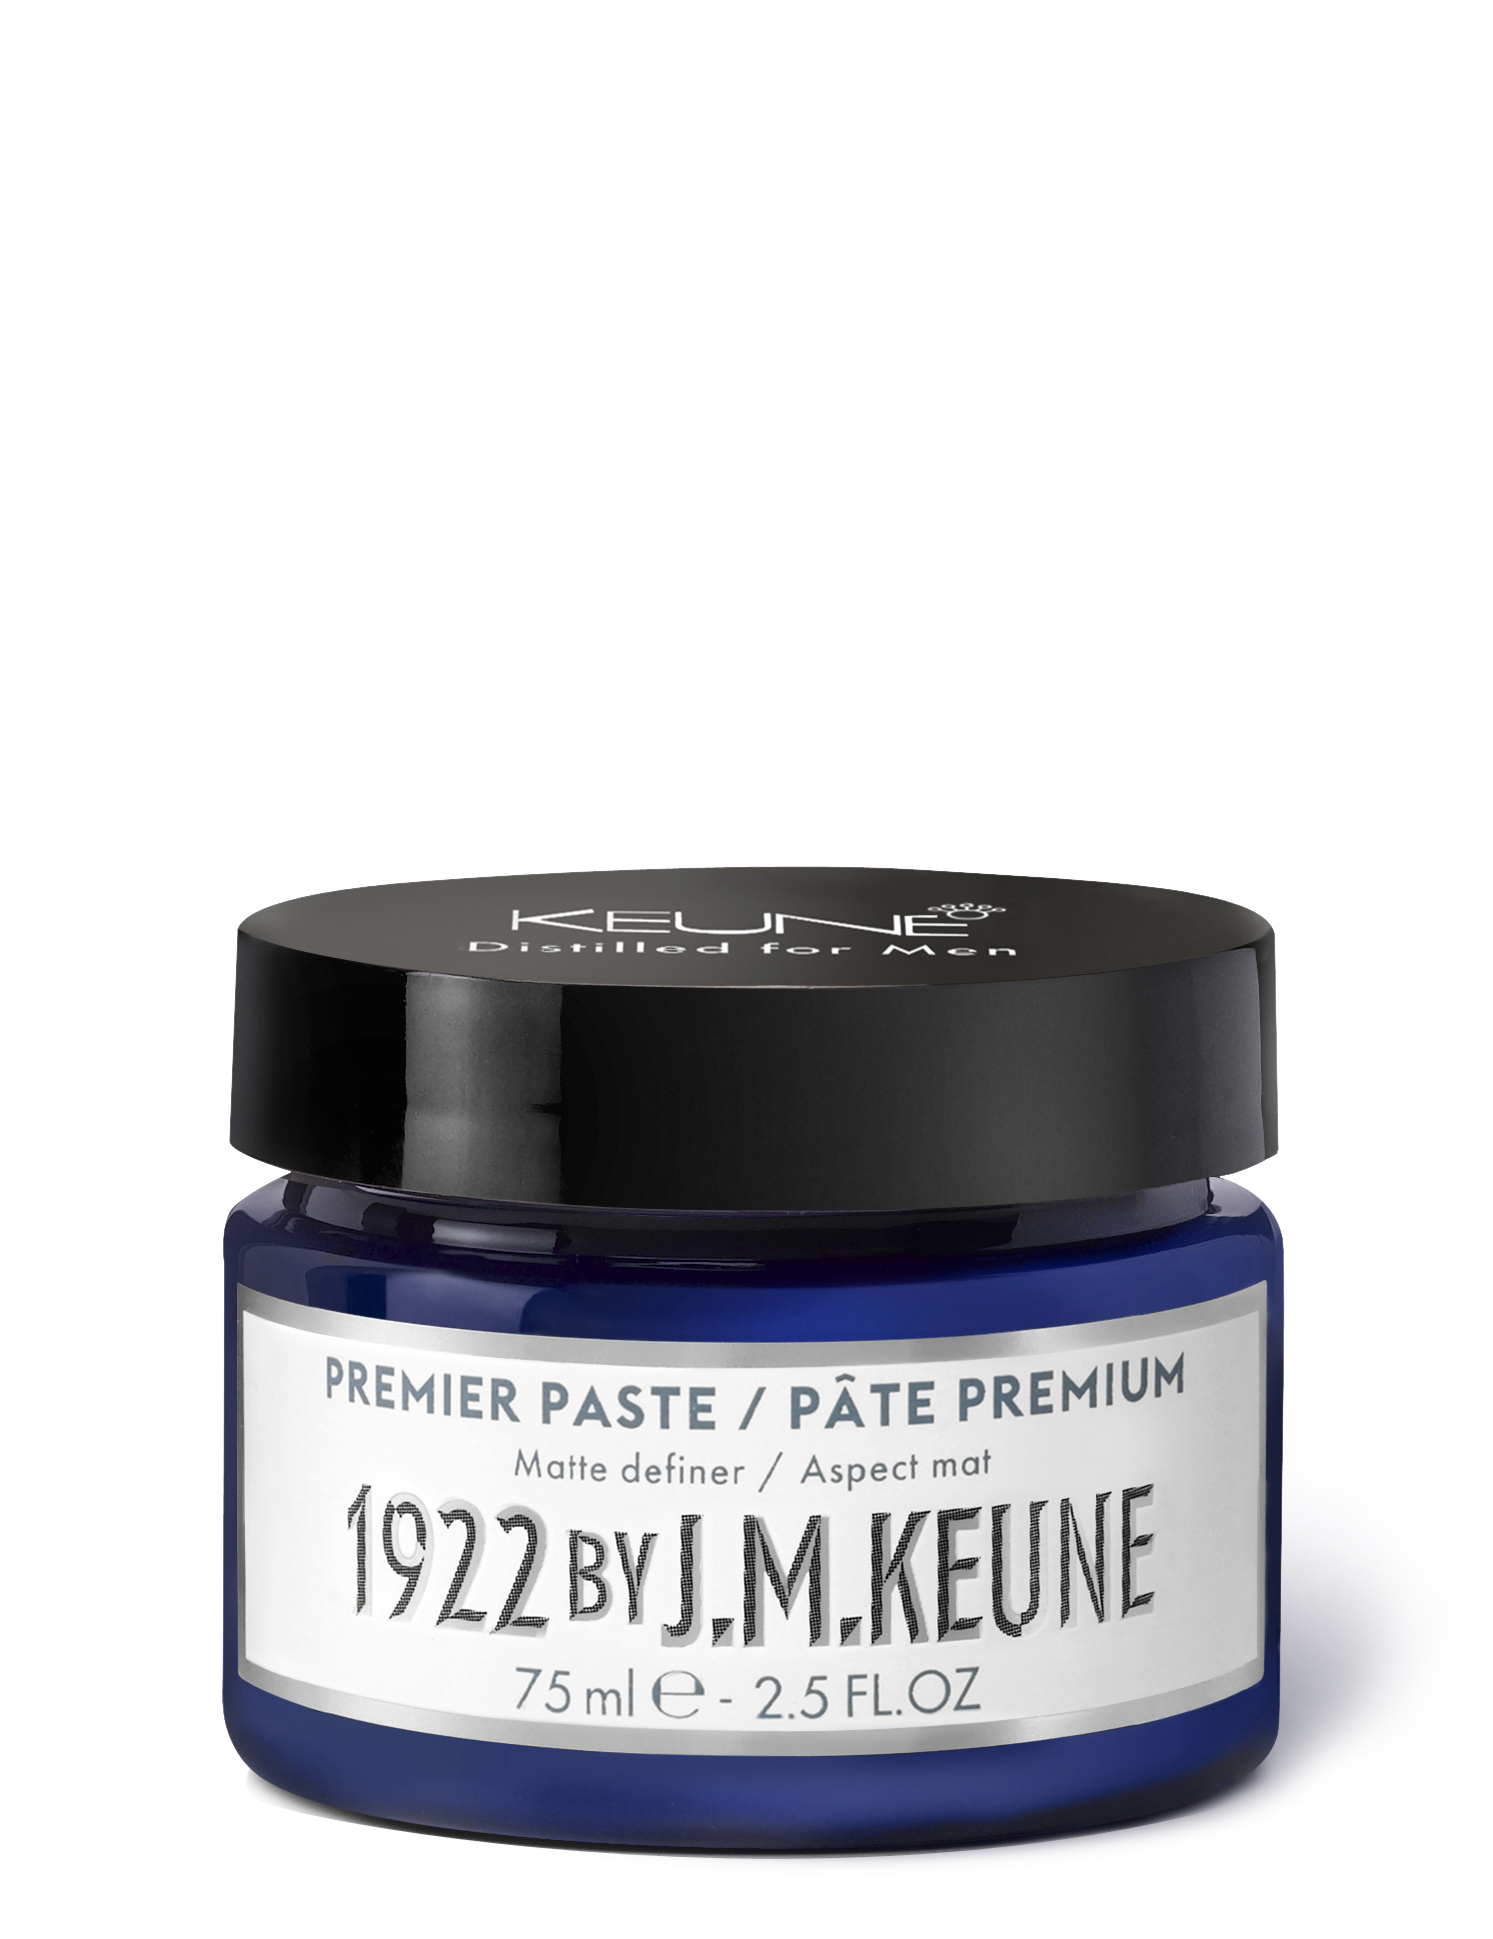 In English: The hair product 1922 PREMIER PASTE for men offers effective styling and long-lasting hold. Strong hold and matte finish. Available on keune.ch.